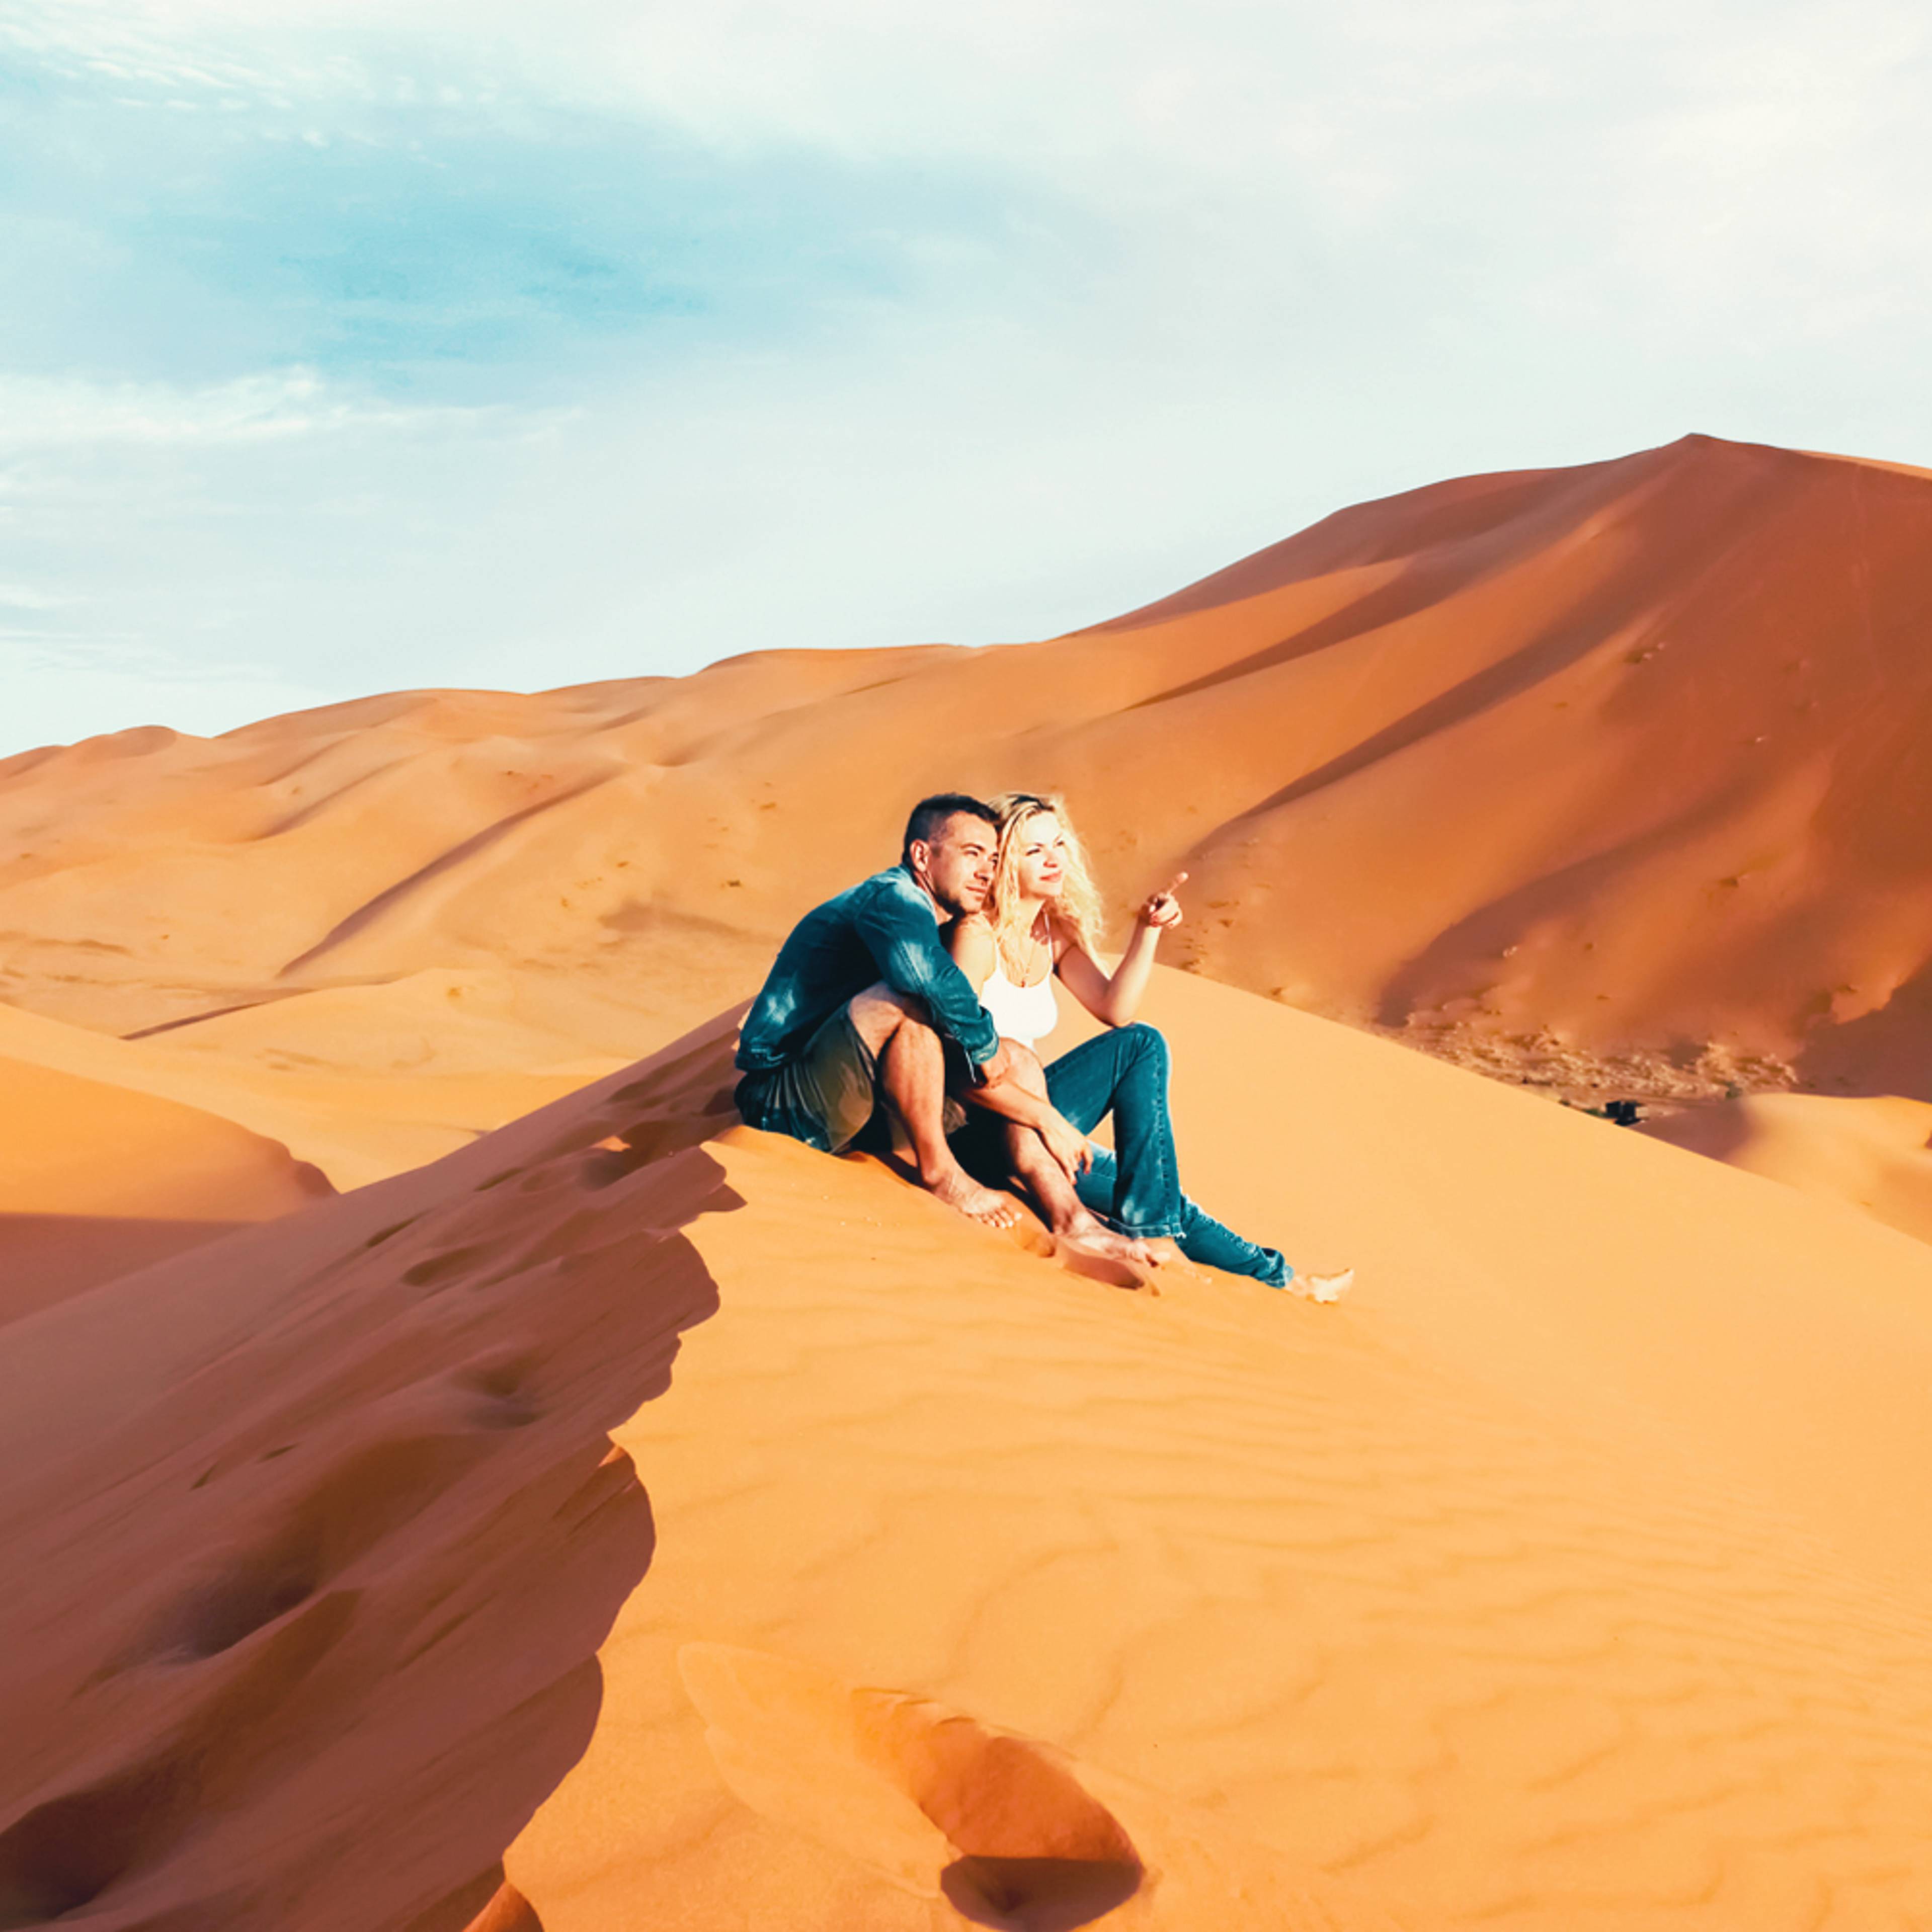 Design your romantic getaway with a local expert in Morocco